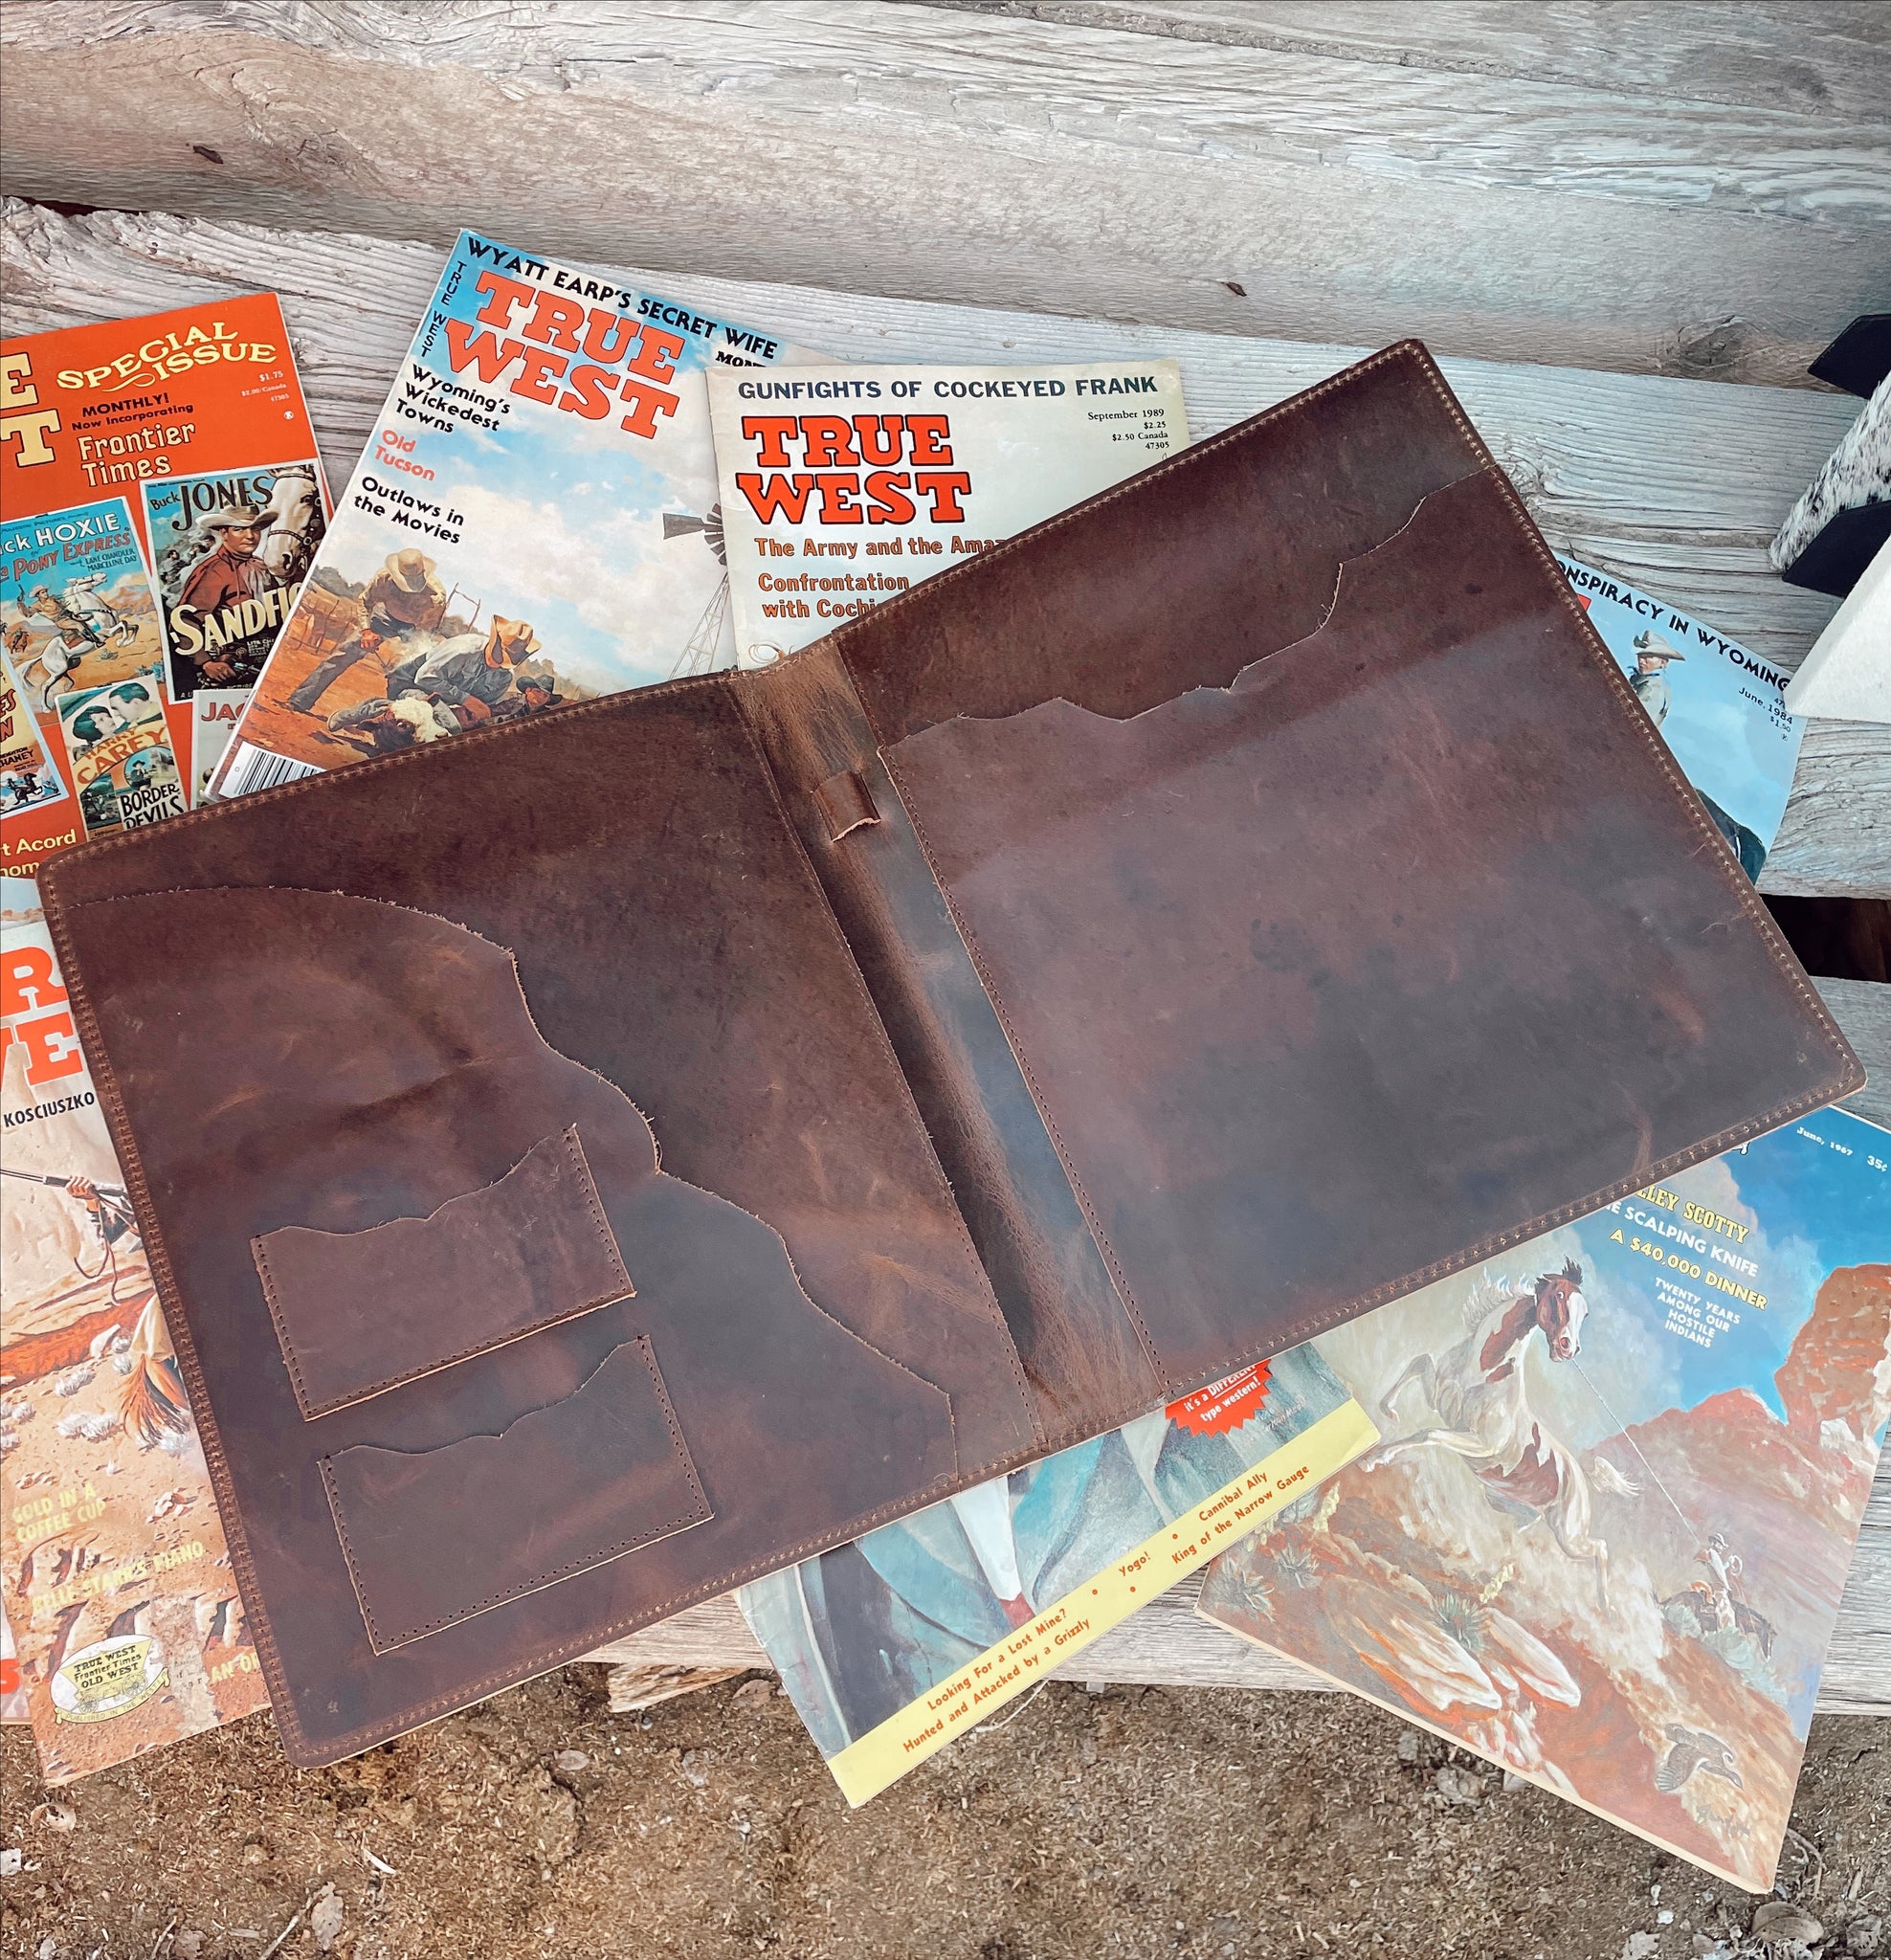 The Cowboy’s Leather Notebook Cover #4